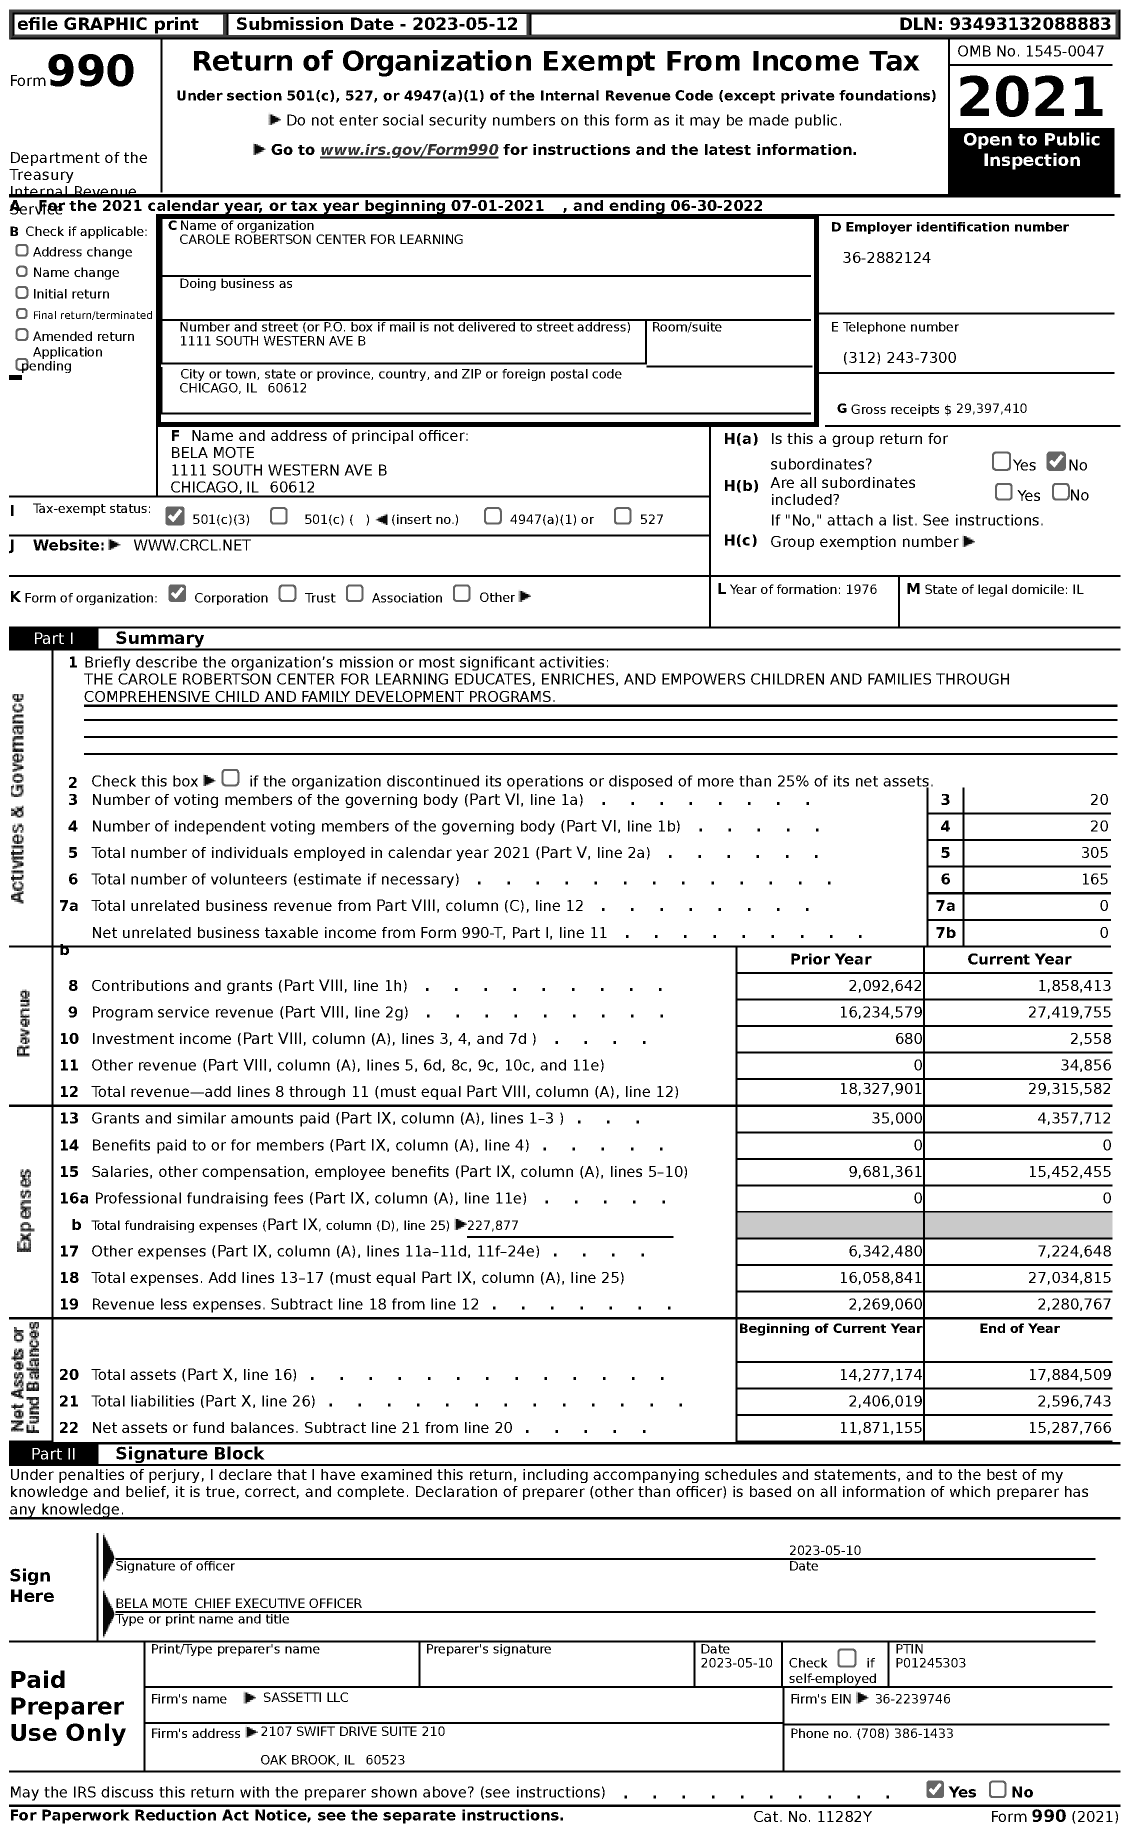 Image of first page of 2021 Form 990 for Carole Robertson Center for Learning (CRCL)